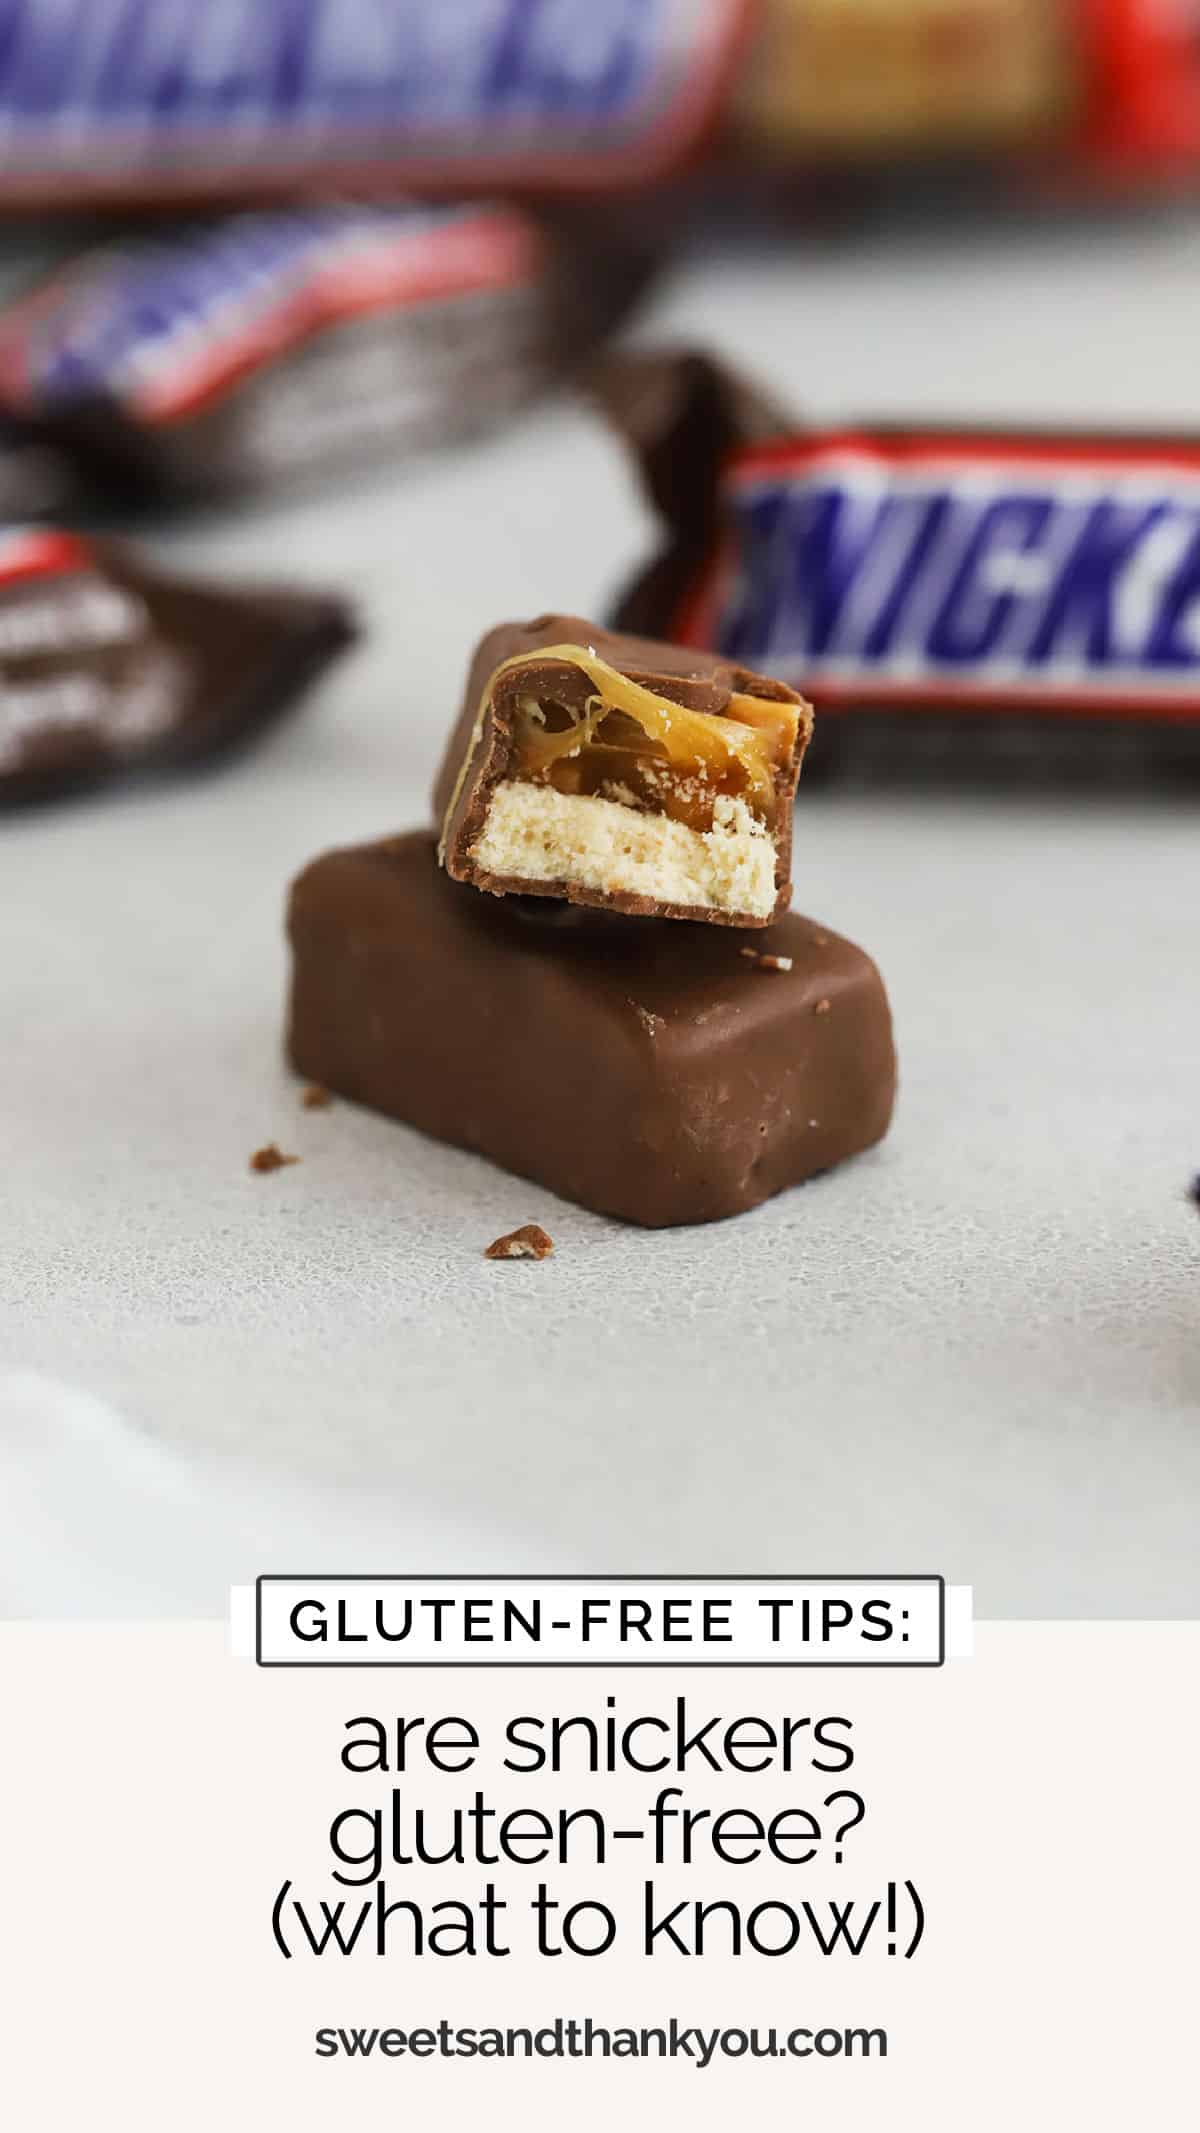 Wondering if Snickers are gluten-free? Get the scoop on which varieties are safe to eat, what to watch out for, and more! / are snickers candy bars gluten-free / is snickers gluten-free / gluten-free candy bars / gluten-free halloween candy / which candy bars are gluten-free / is snickers bar gluten-free